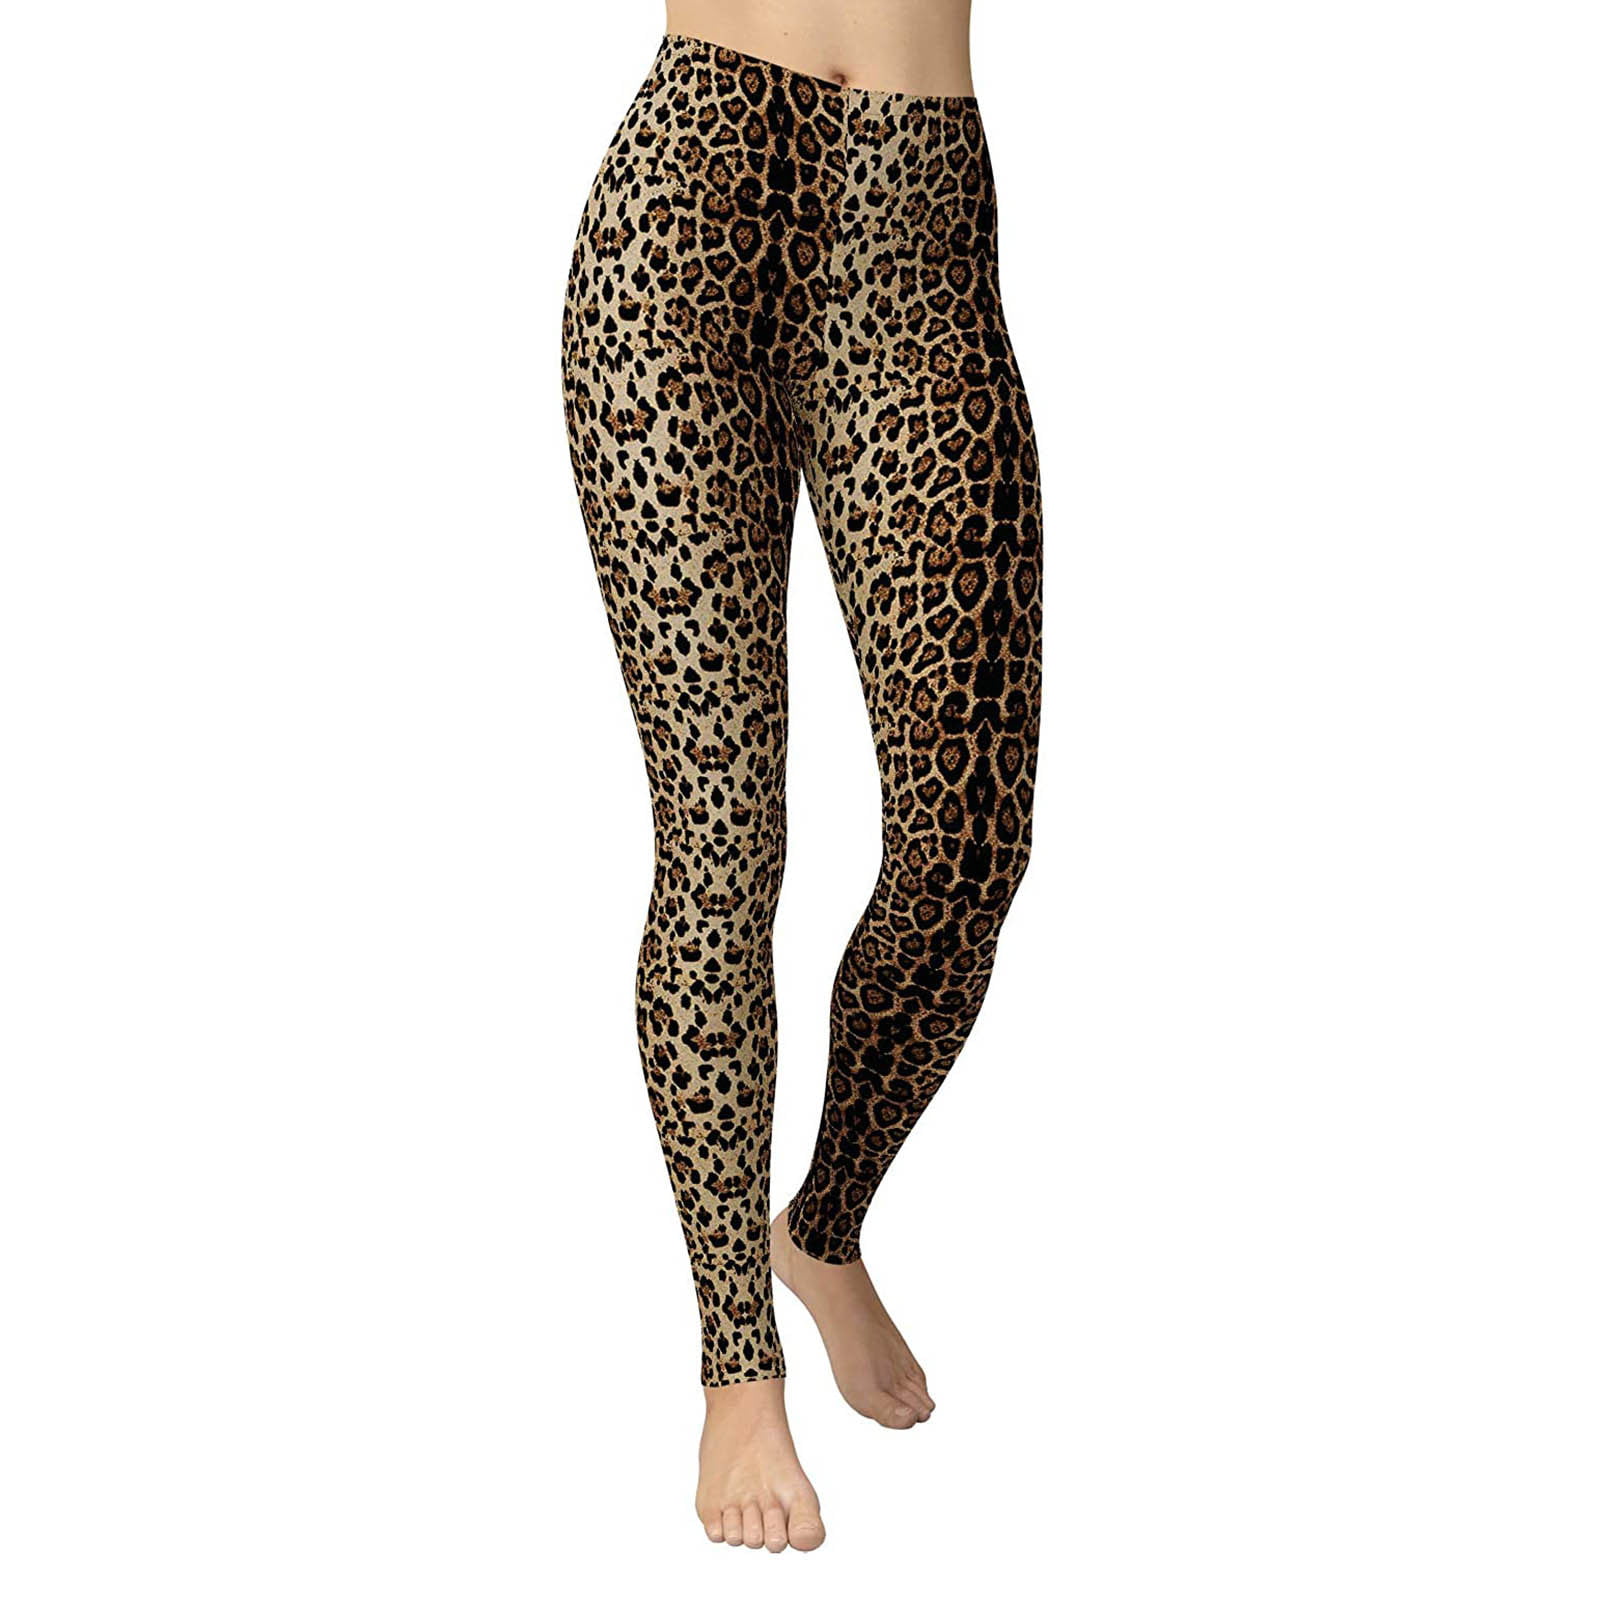 Gubotare Yoga Pants For Women With Pockets High Waisted Pattern